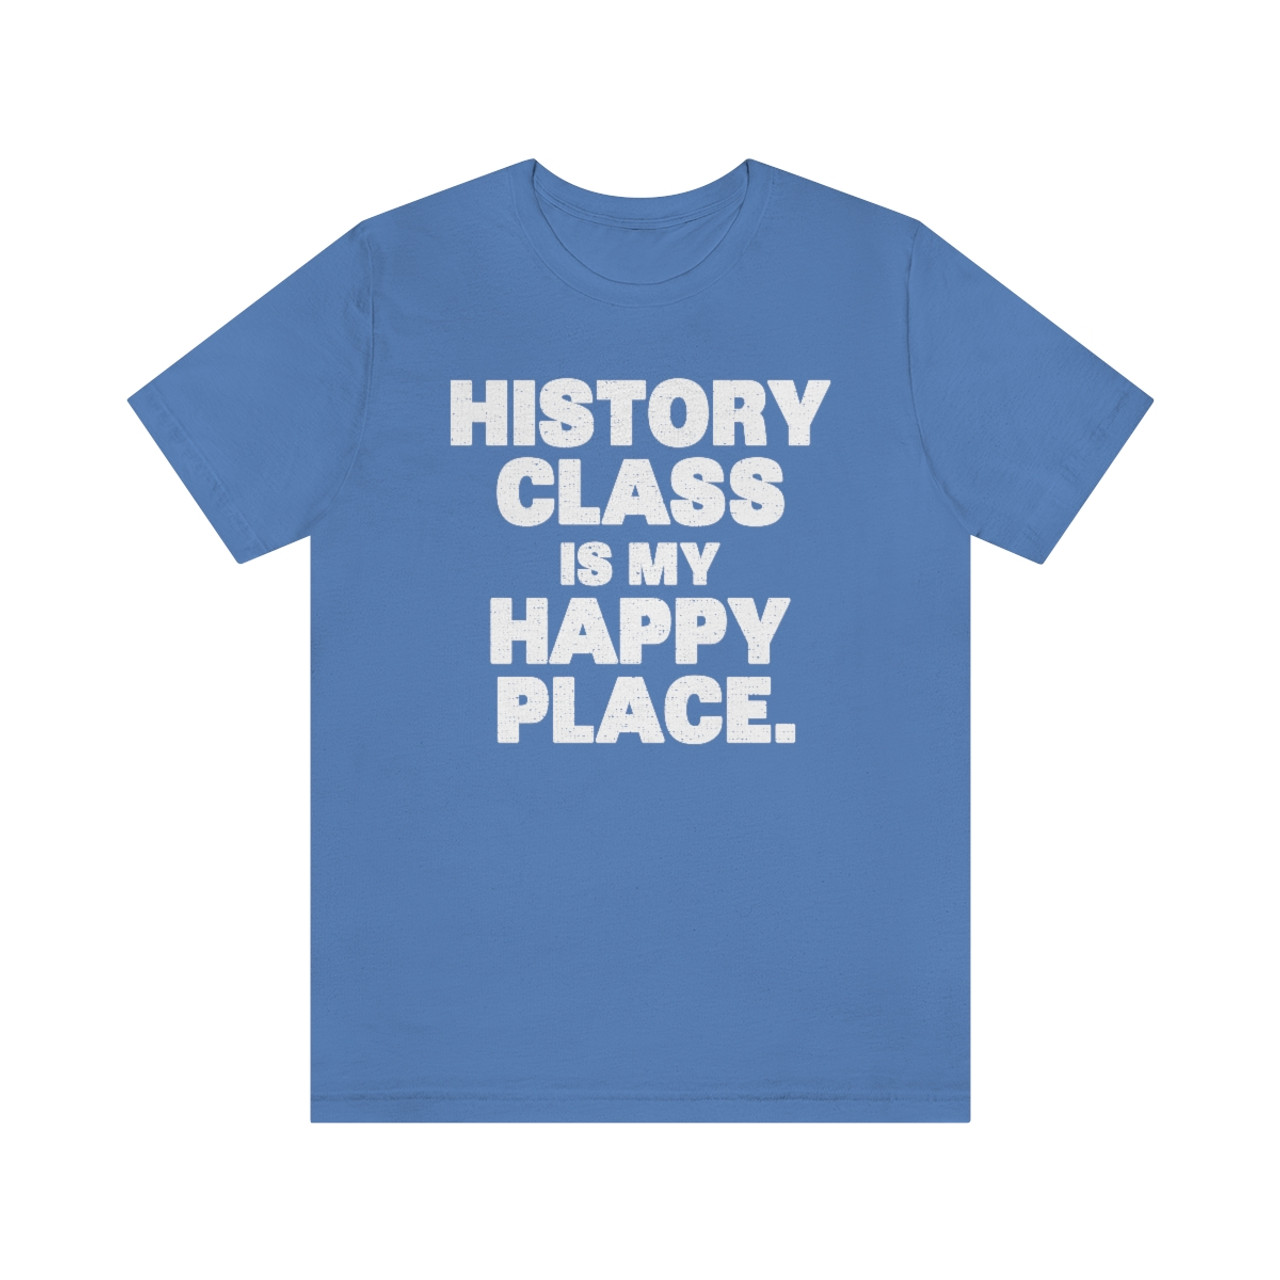 "History Class is My Happy Place" Crew Neck T-shirt